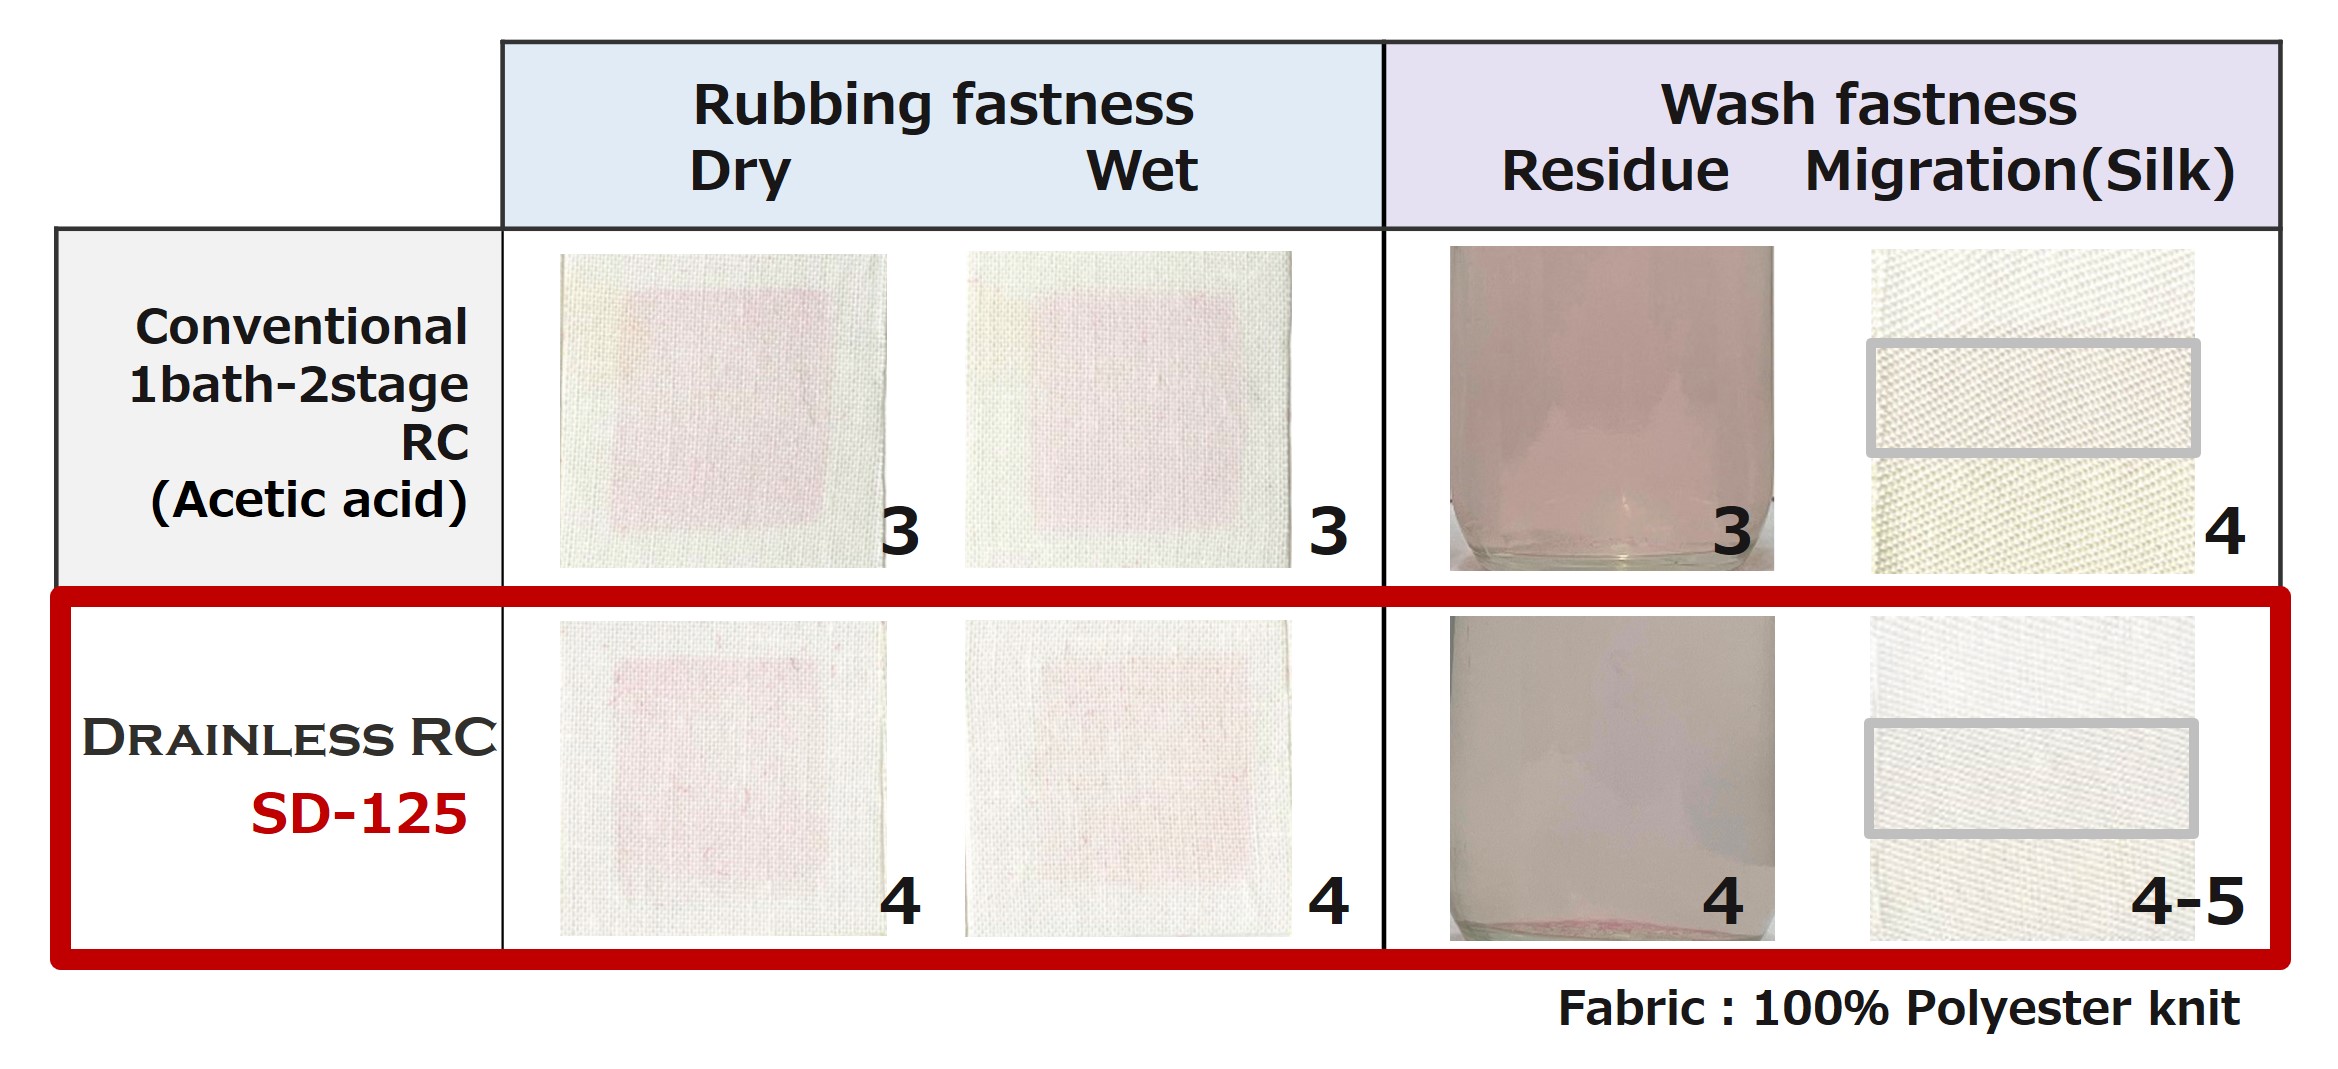 Rubbing fastness is level 4,and wash fastness is level 4-5